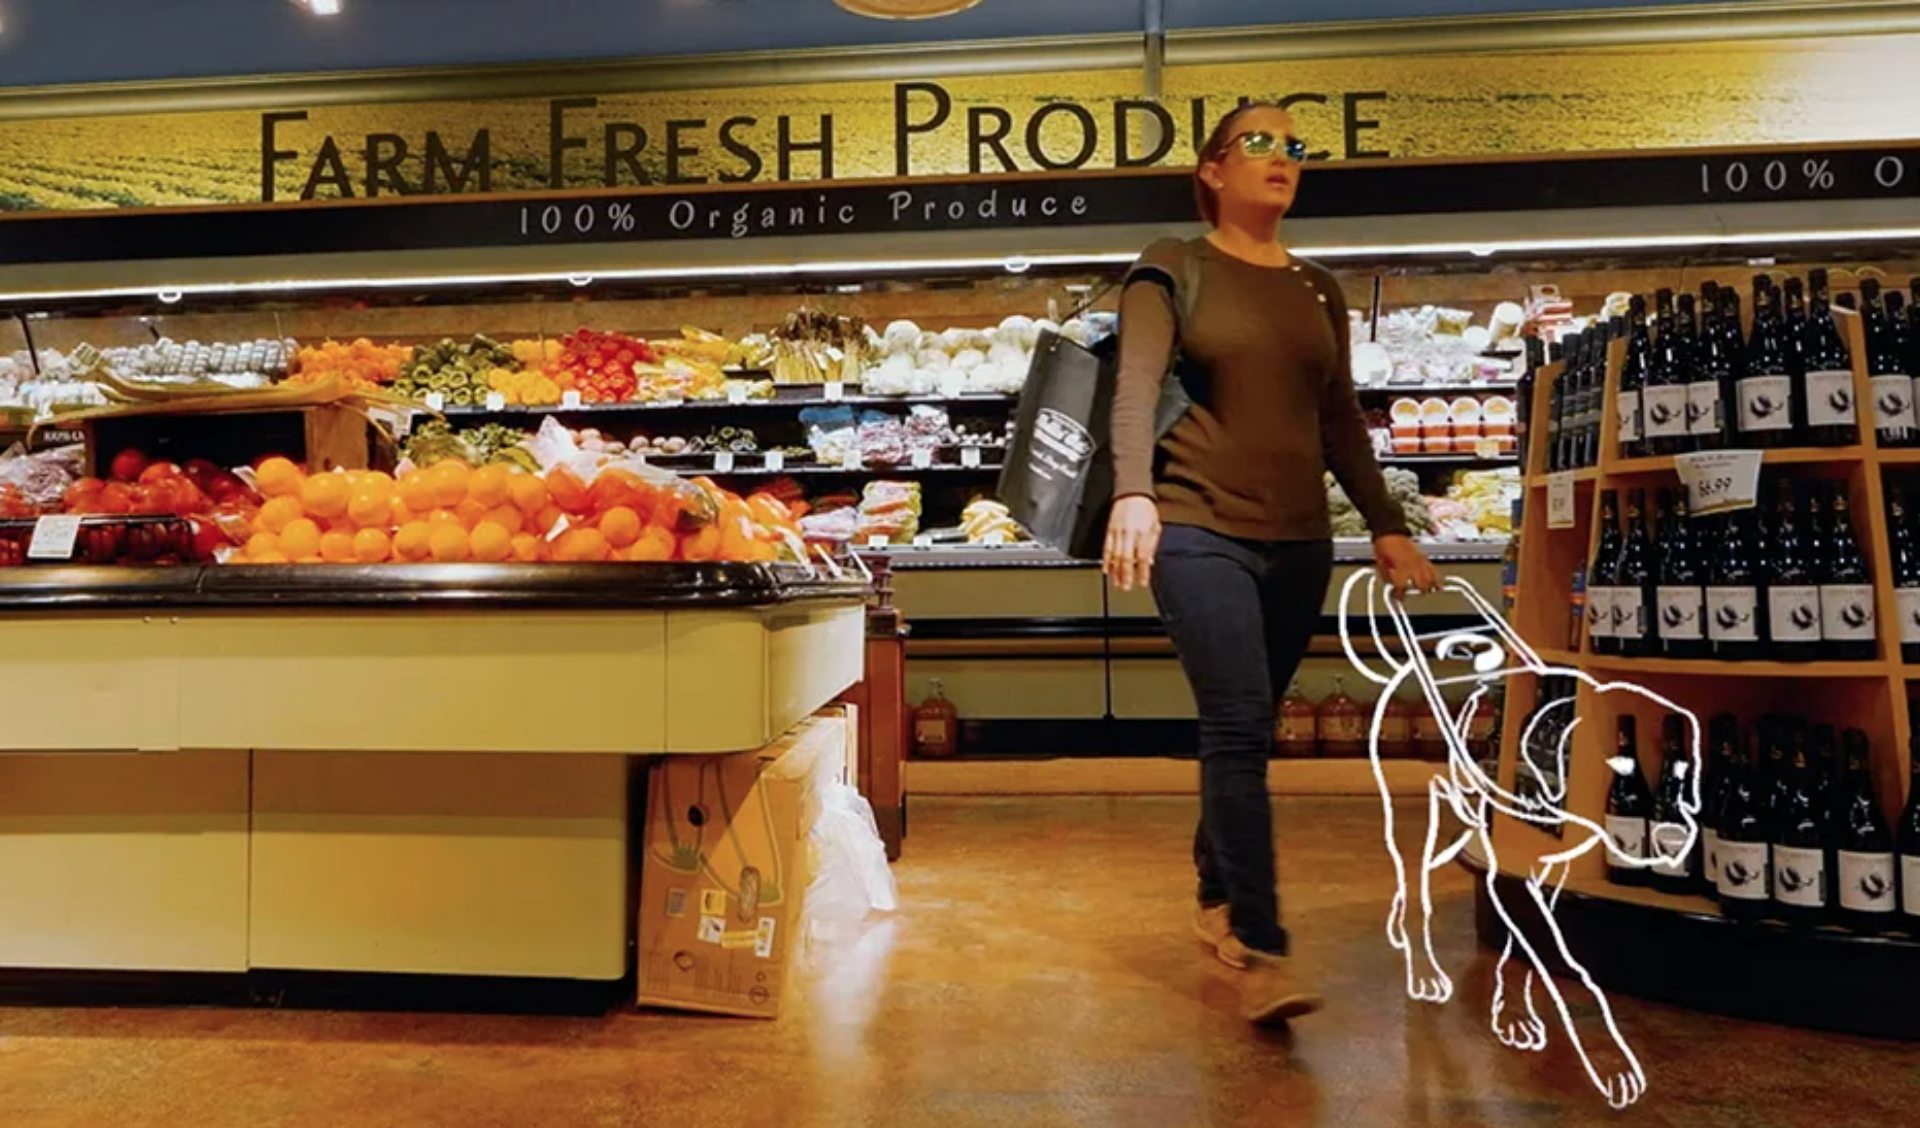 A woman walks through the produce department with a cartoon guide dog guiding her